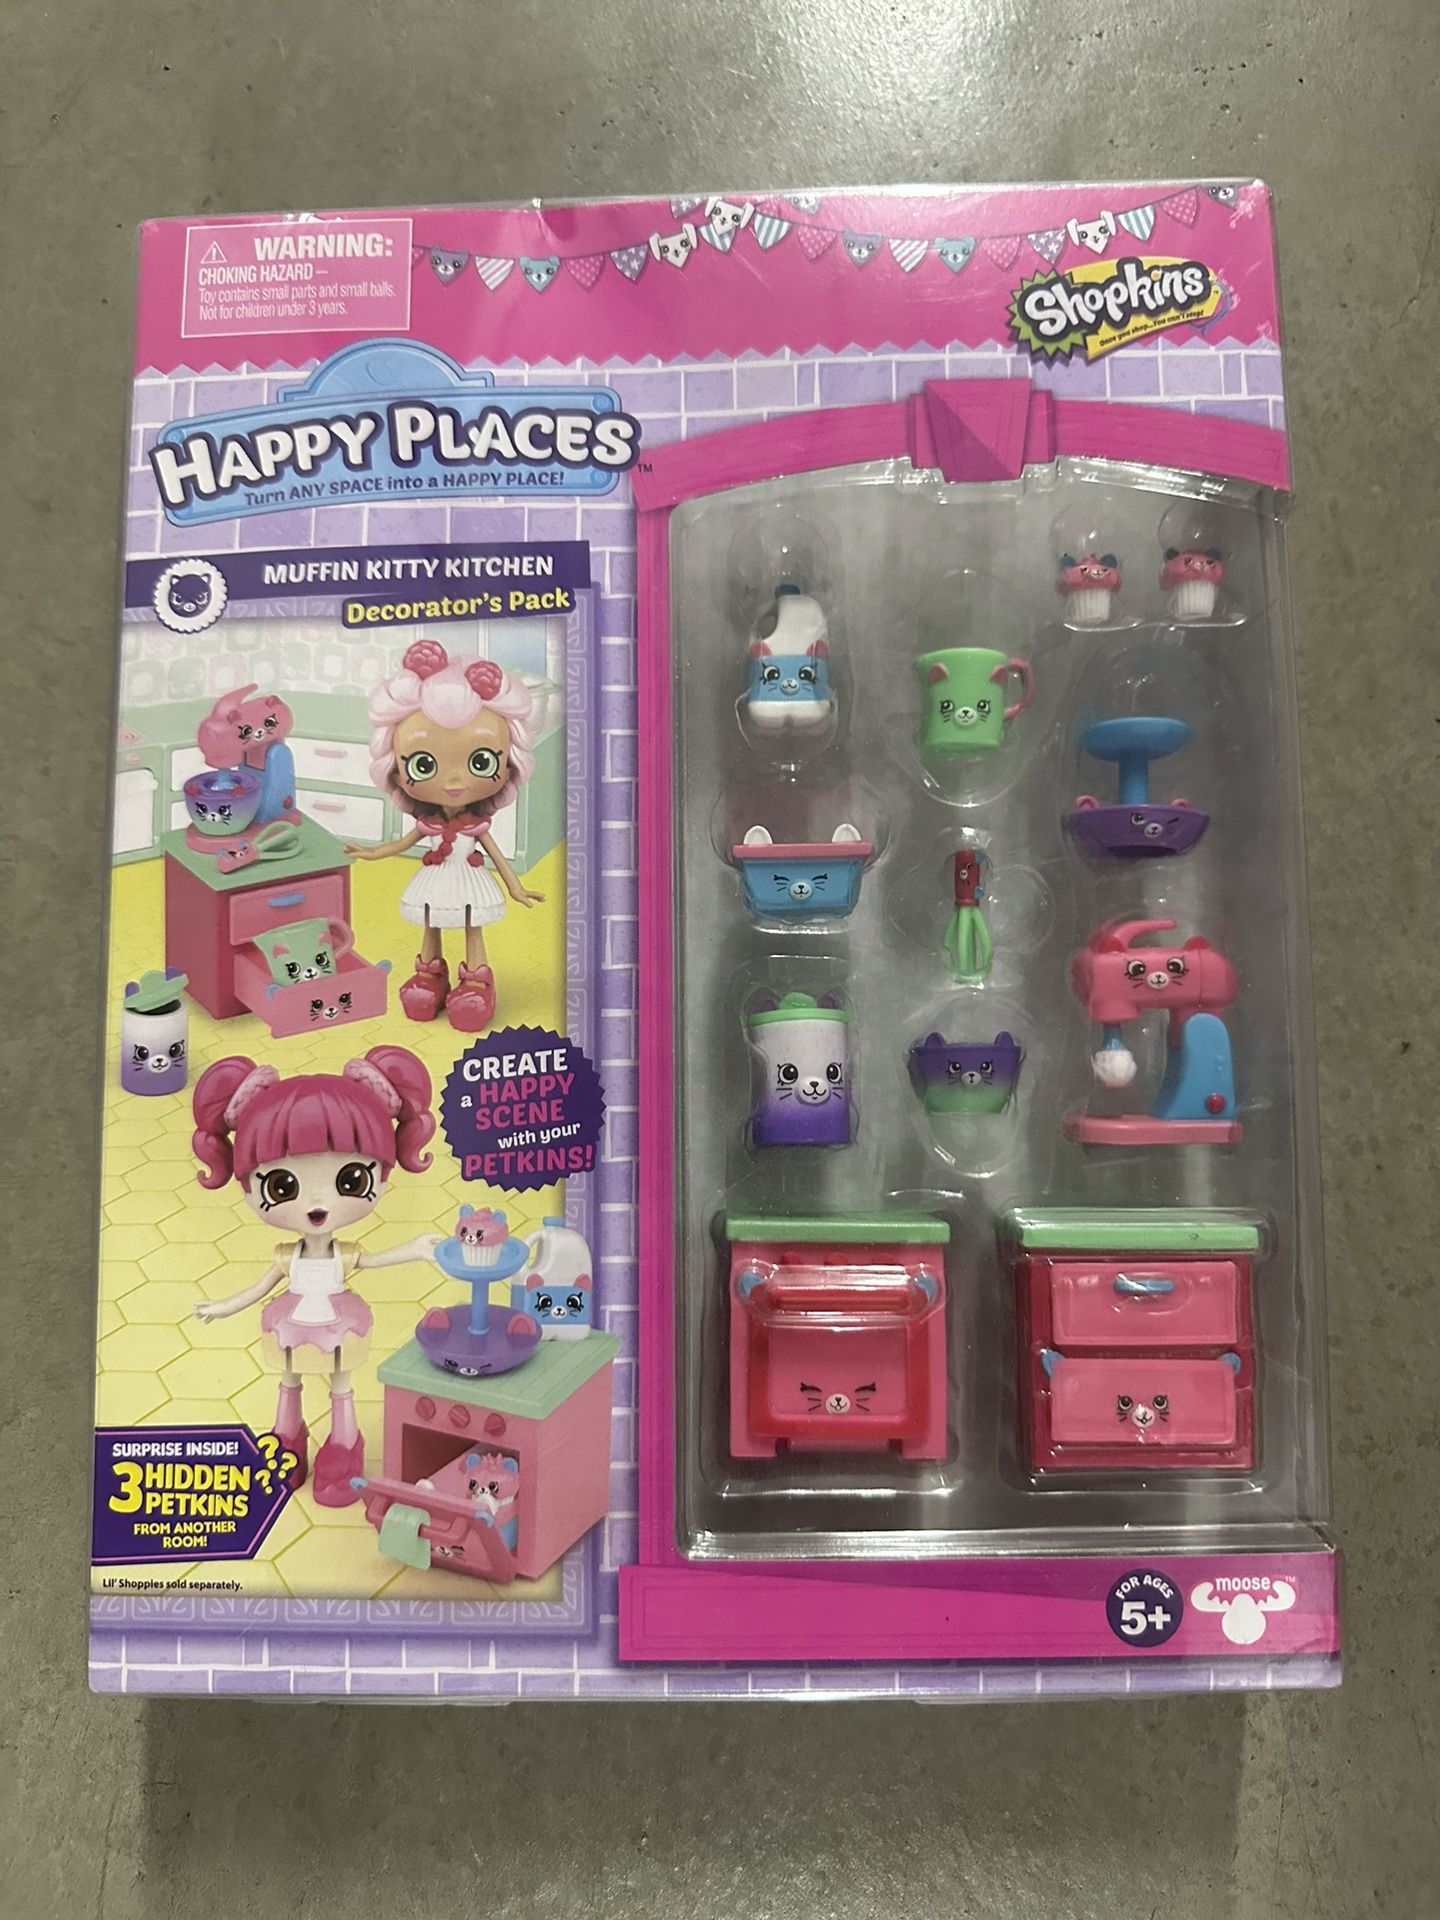 SHOPKINS HAPPY PLACES MUFFIN KITTY KITCHEN DECORATOR’S PACK MOOSE TOYS